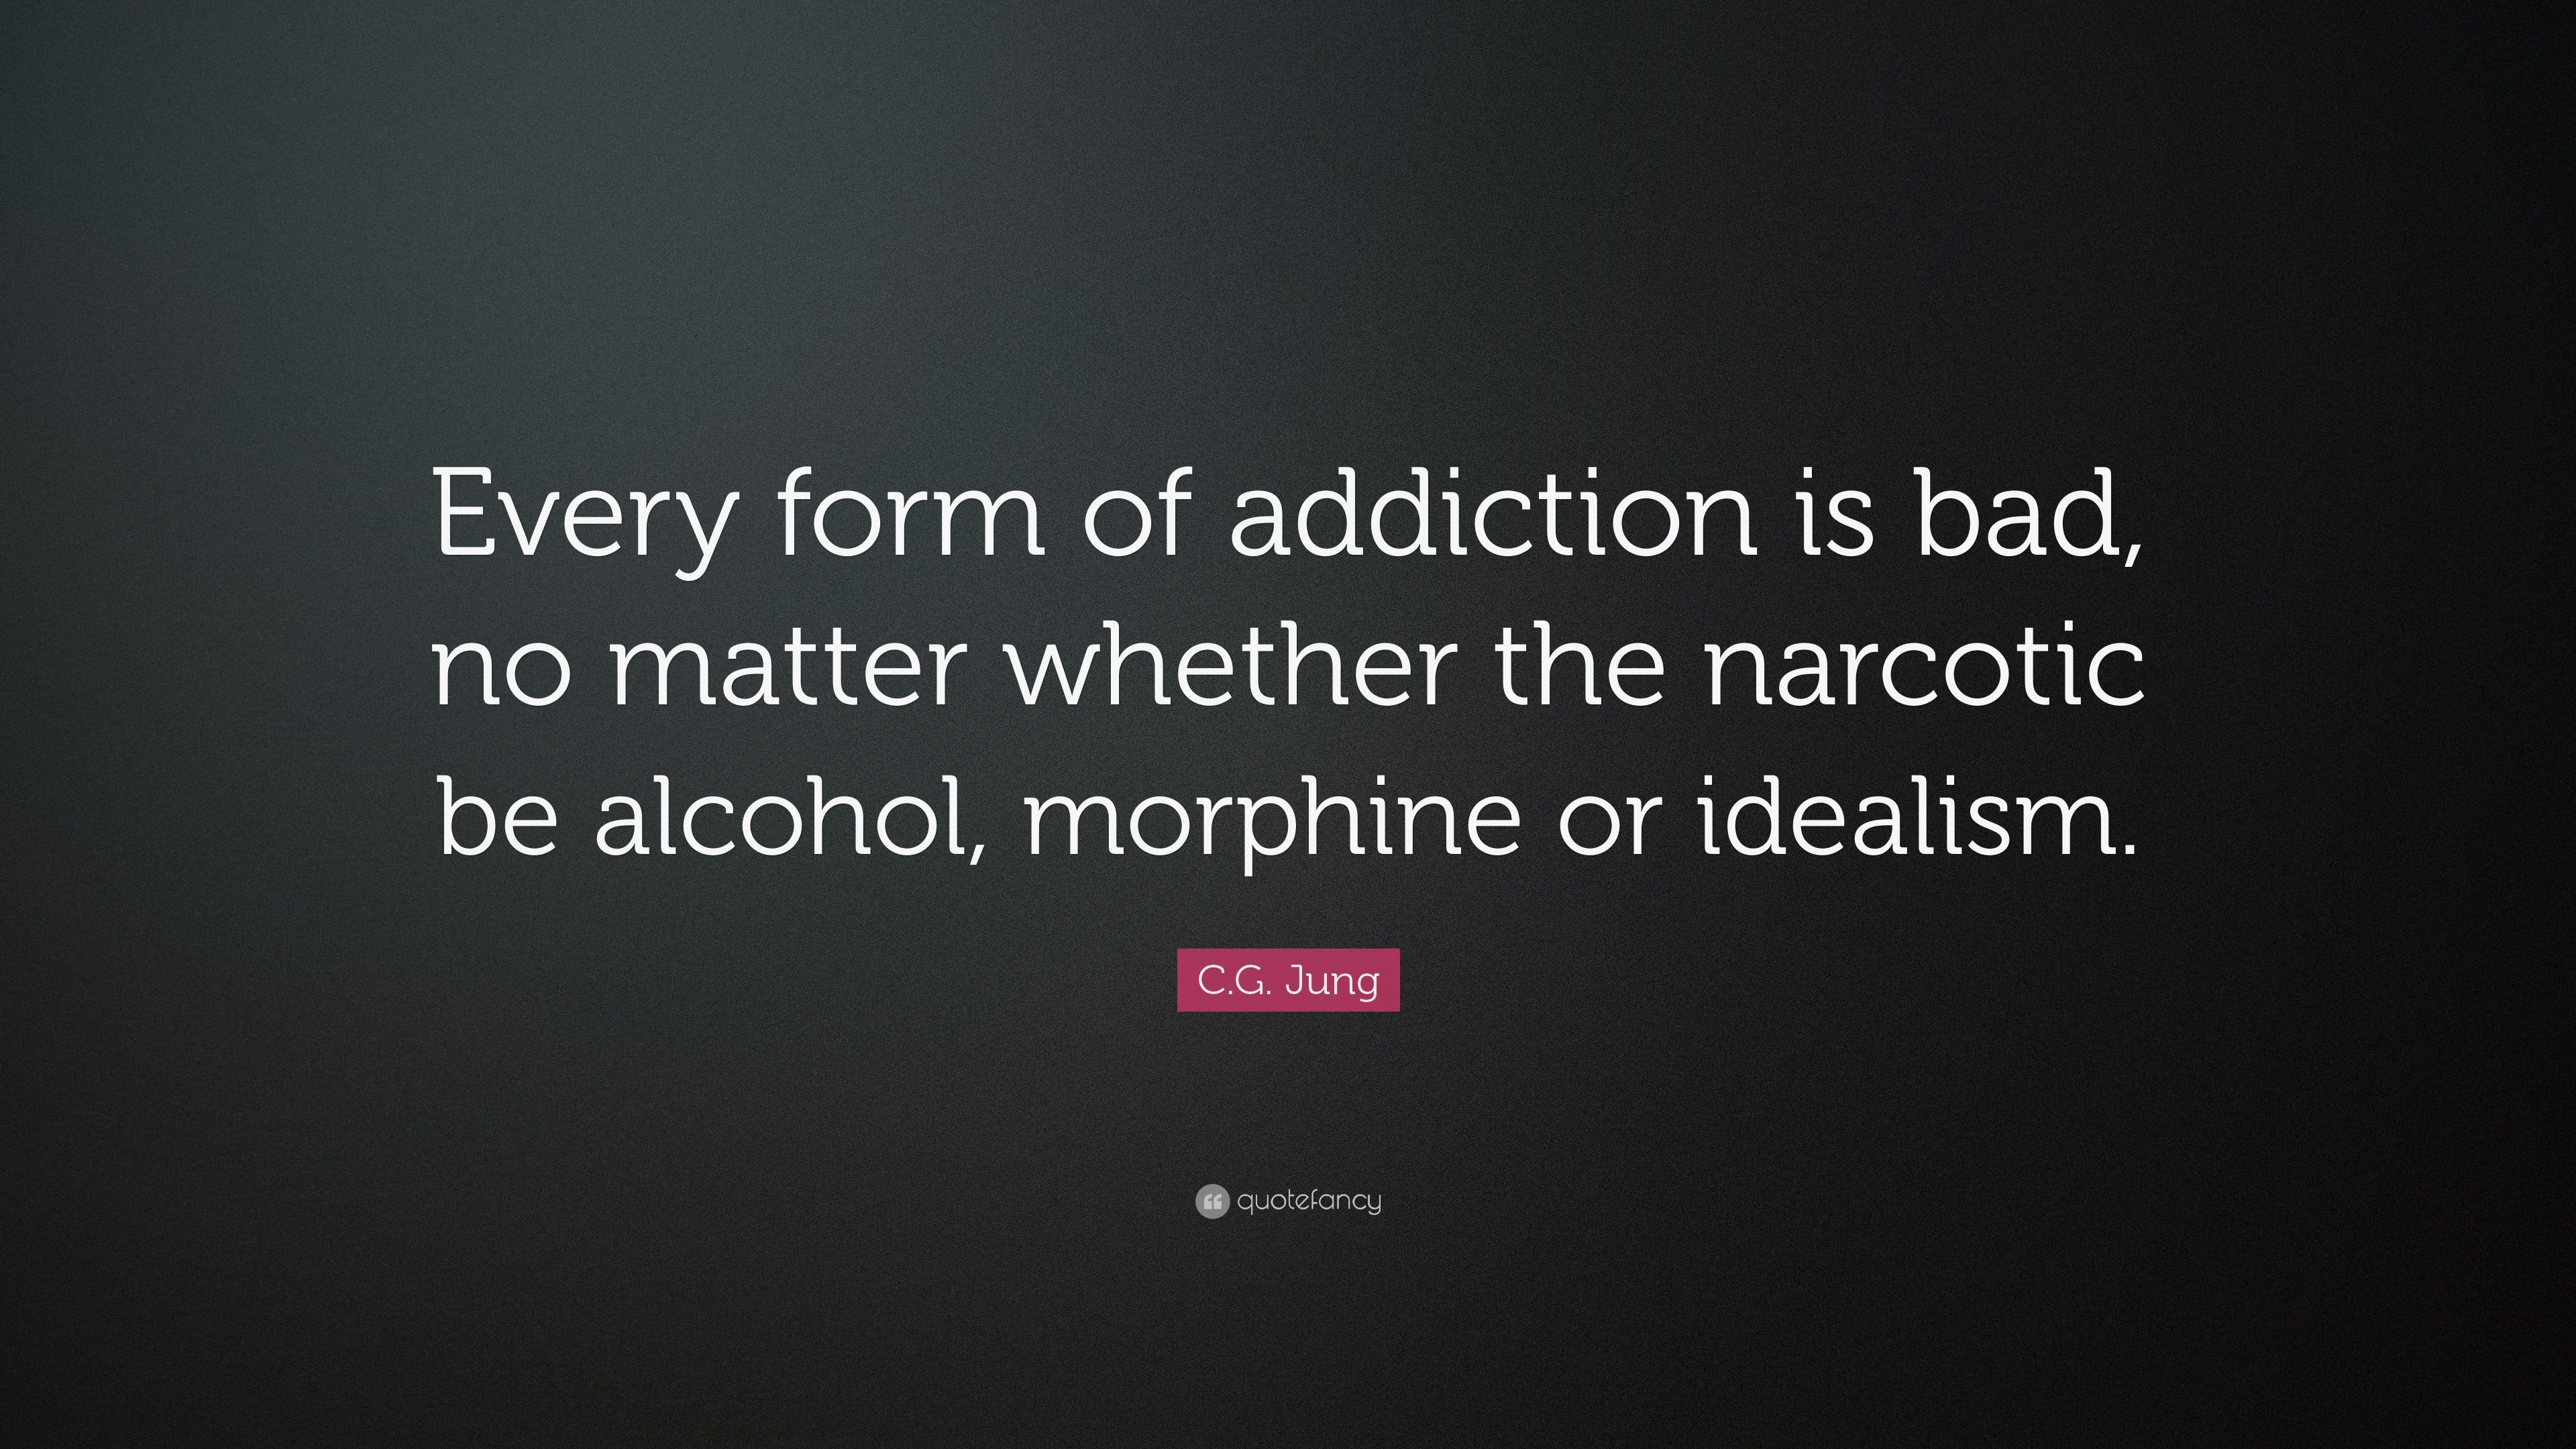 C.G. Jung Quote: “Every form of addiction is bad, no matter whether